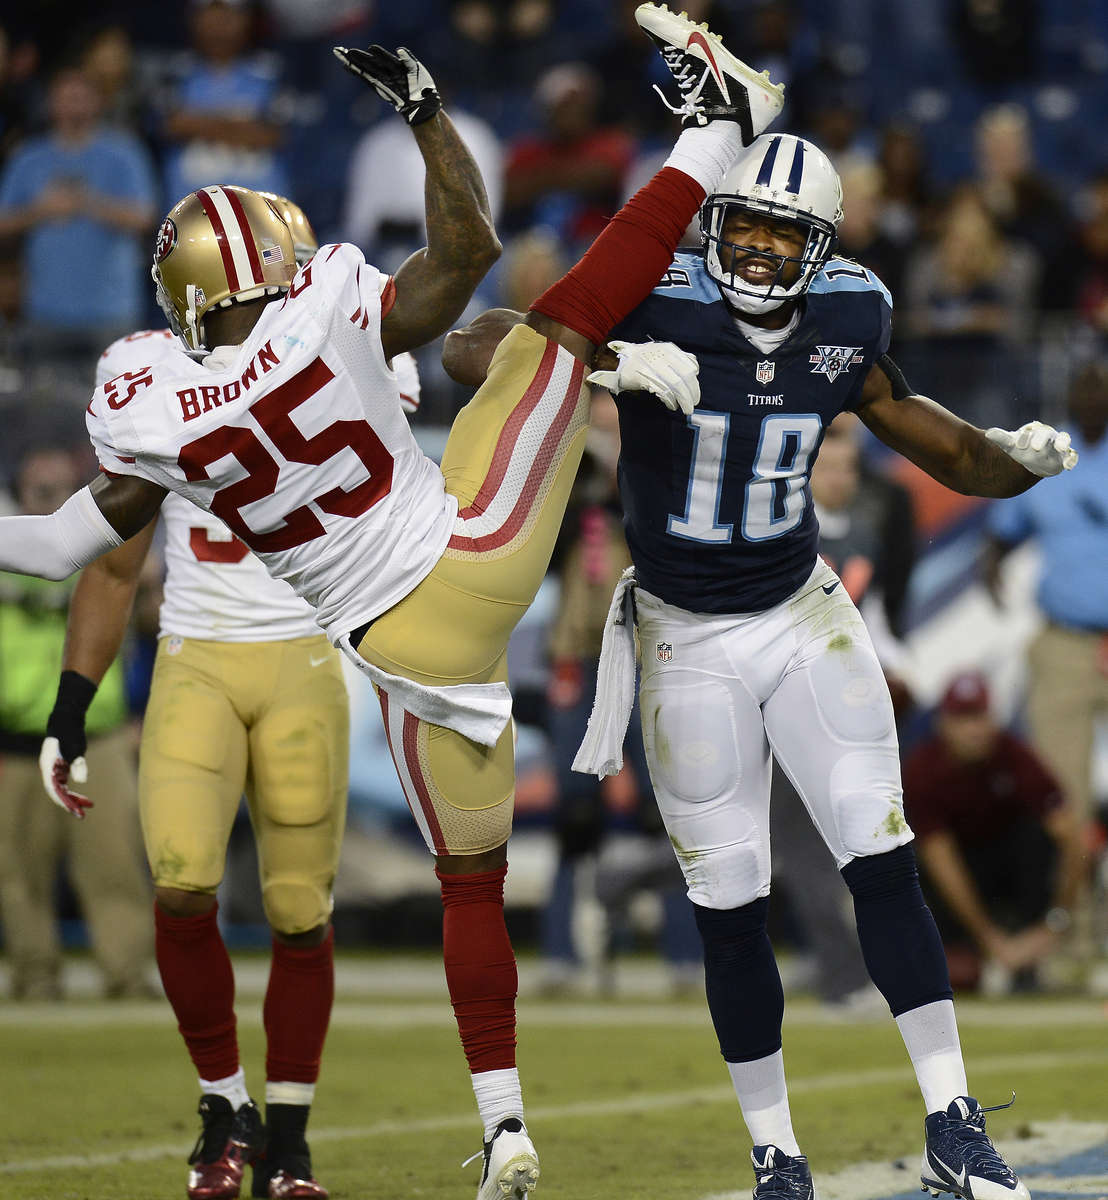 Tennessee Titans wide receiver Kenny Britt pushes San Francisco 49ers cornerback Tarell Brown after a play in the fourth quarter of a NFL football game on Oct. 20, 2013, in Nashville, Tenn. Britt was penalized for unnecessary roughness on the play. The 49ers won 31-17. (AP Photo/ Mark Zaleski)